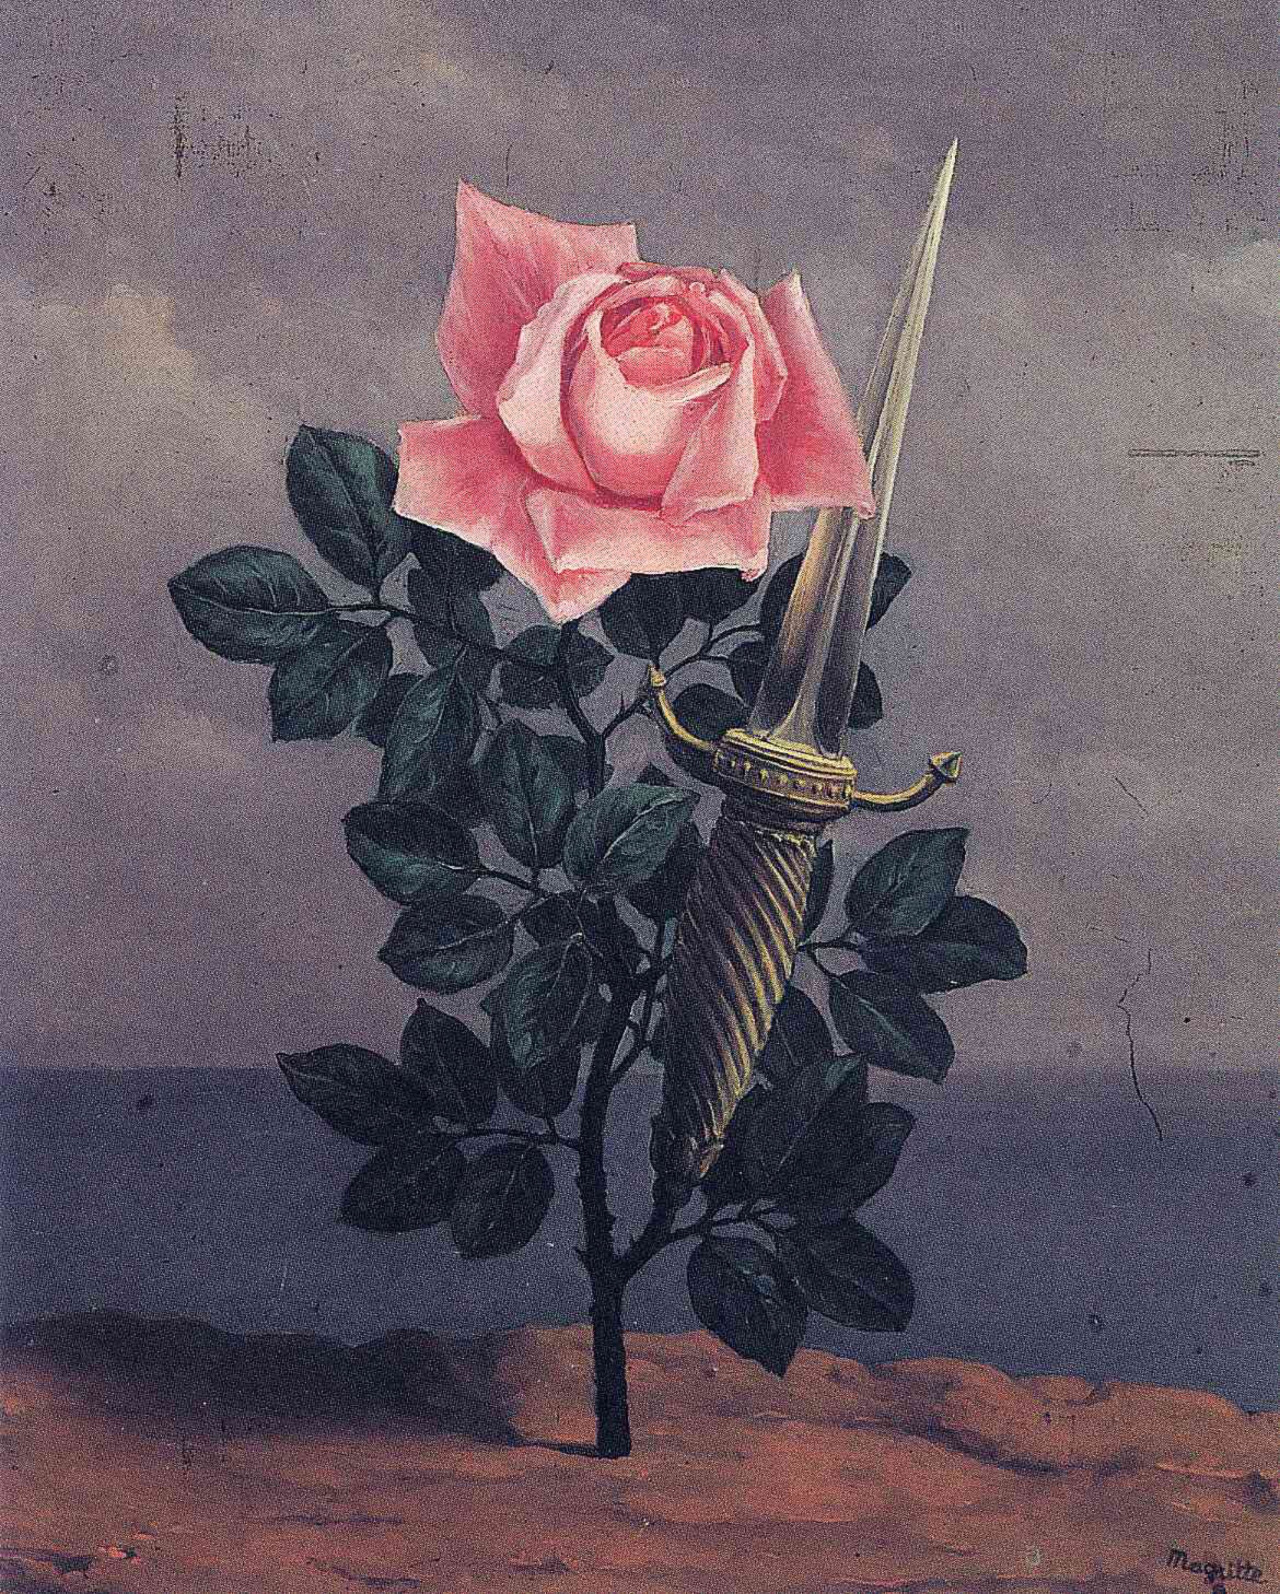 Rene Magritte - The Blow To The Heart, 1952.jpg